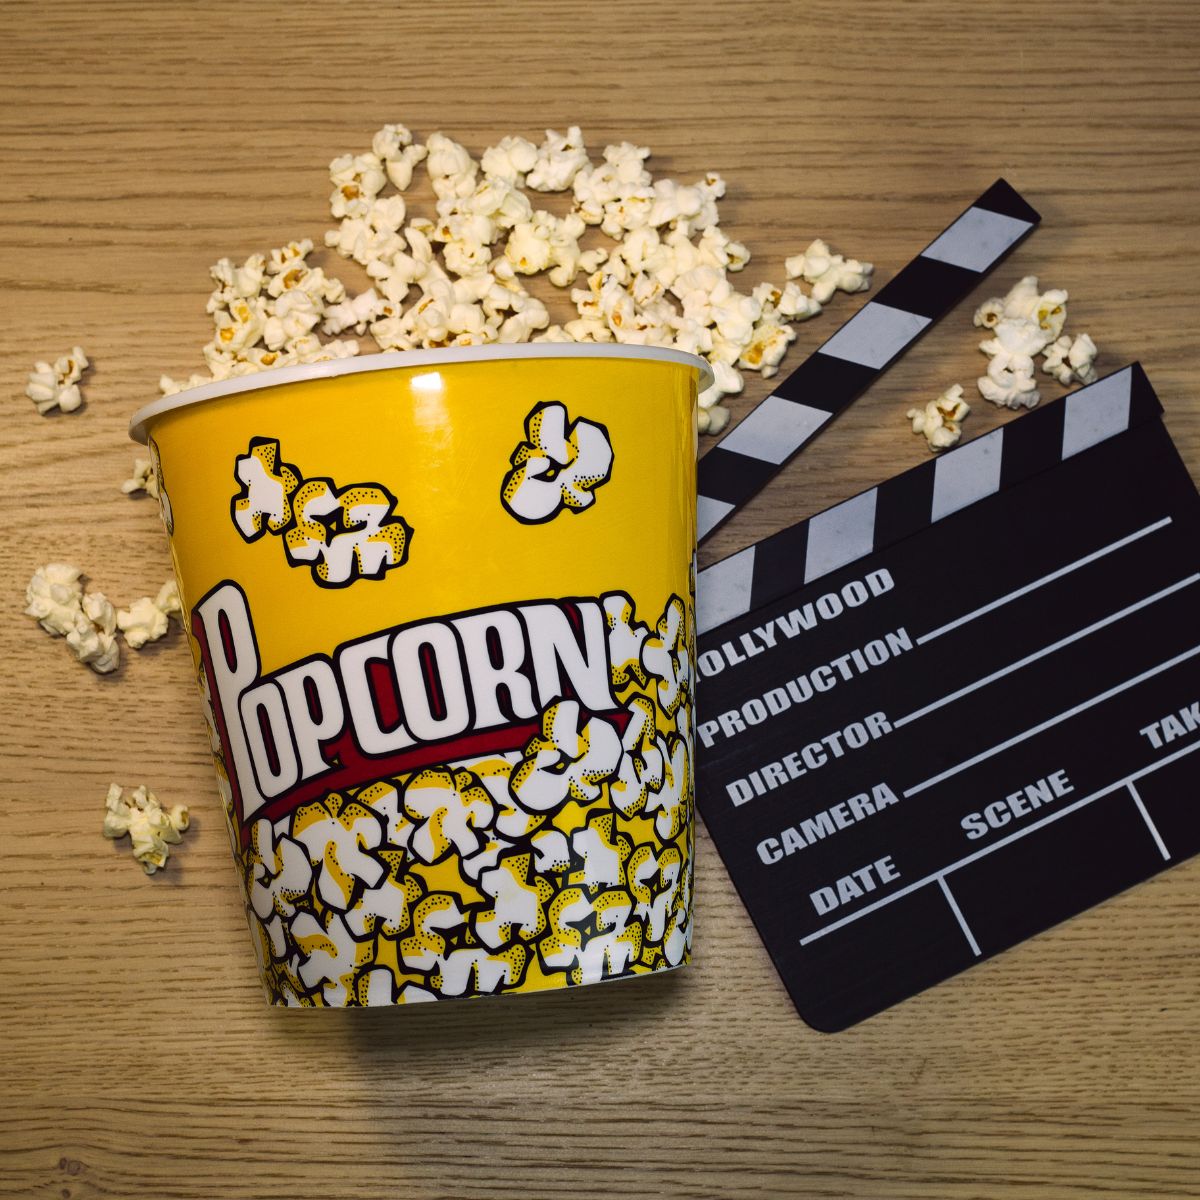 A cup of popcorn and a movie clapper on a wooden table.